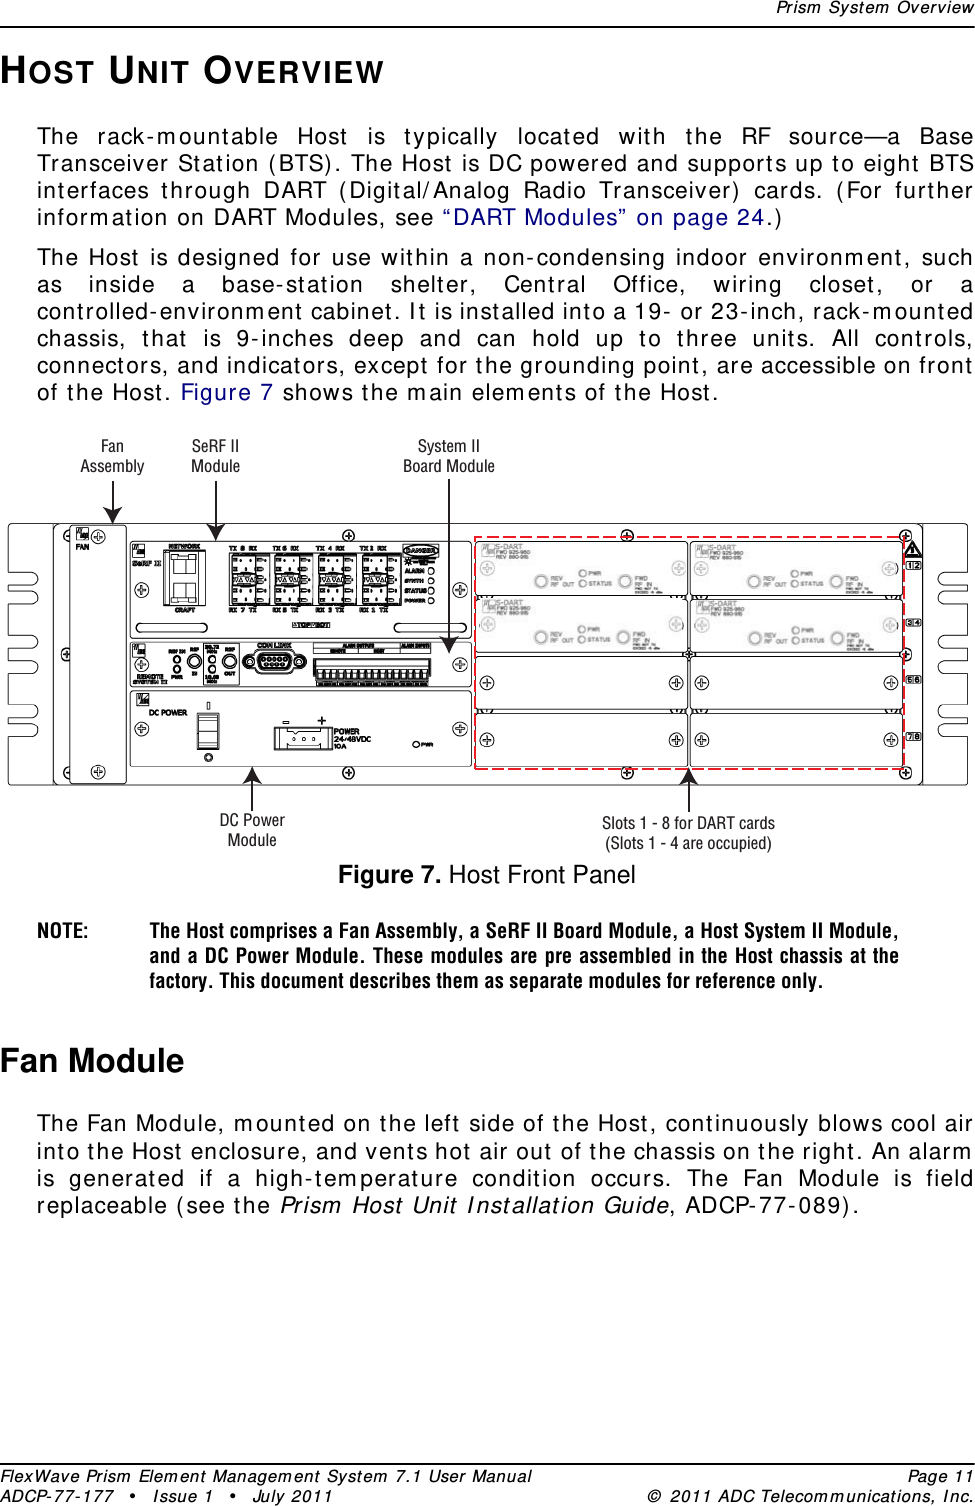 Prism System OverviewFlexWave Prism Element Management System 7.1 User Manual Page 11ADCP-77-177 • Issue 1 • July 2011 © 2011 ADC Telecommunications, Inc.HOST UNIT OVERVIEWThe rack-mountable Host is typically located with the RF source—a Base Transceiver Station (BTS). The Host is DC powered and supports up to eight BTS interfaces through DART (Digital/Analog Radio Transceiver) cards. (For further information on DART Modules, see “DART Modules” on page 24.)The Host is designed for use within a non-condensing indoor environment, such as inside a base-station shelter, Central Office, wiring closet, or a controlled-environment cabinet. It is installed into a 19- or 23-inch, rack-mounted chassis, that is 9-inches deep and can hold up to three units. All controls, connectors, and indicators, except for the grounding point, are accessible on front of the Host. Figure 7 shows the main elements of the Host.Figure 7. Host Front PanelNOTE: The Host comprises a Fan Assembly, a SeRF II Board Module, a Host System II Module, and a DC Power Module. These modules are pre assembled in the Host chassis at the factory. This document describes them as separate modules for reference only. Fan ModuleThe Fan Module, mounted on the left side of the Host, continuously blows cool air into the Host enclosure, and vents hot air out of the chassis on the right. An alarm is generated if a high-temperature condition occurs. The Fan Module is field replaceable (see the Prism Host Unit Installation Guide, ADCP-77-089).FanAssemblySeRF IIModuleSystem IIBoard ModuleDC PowerModuleSlots 1 - 8 for DART cards(Slots 1 - 4 are occupied)